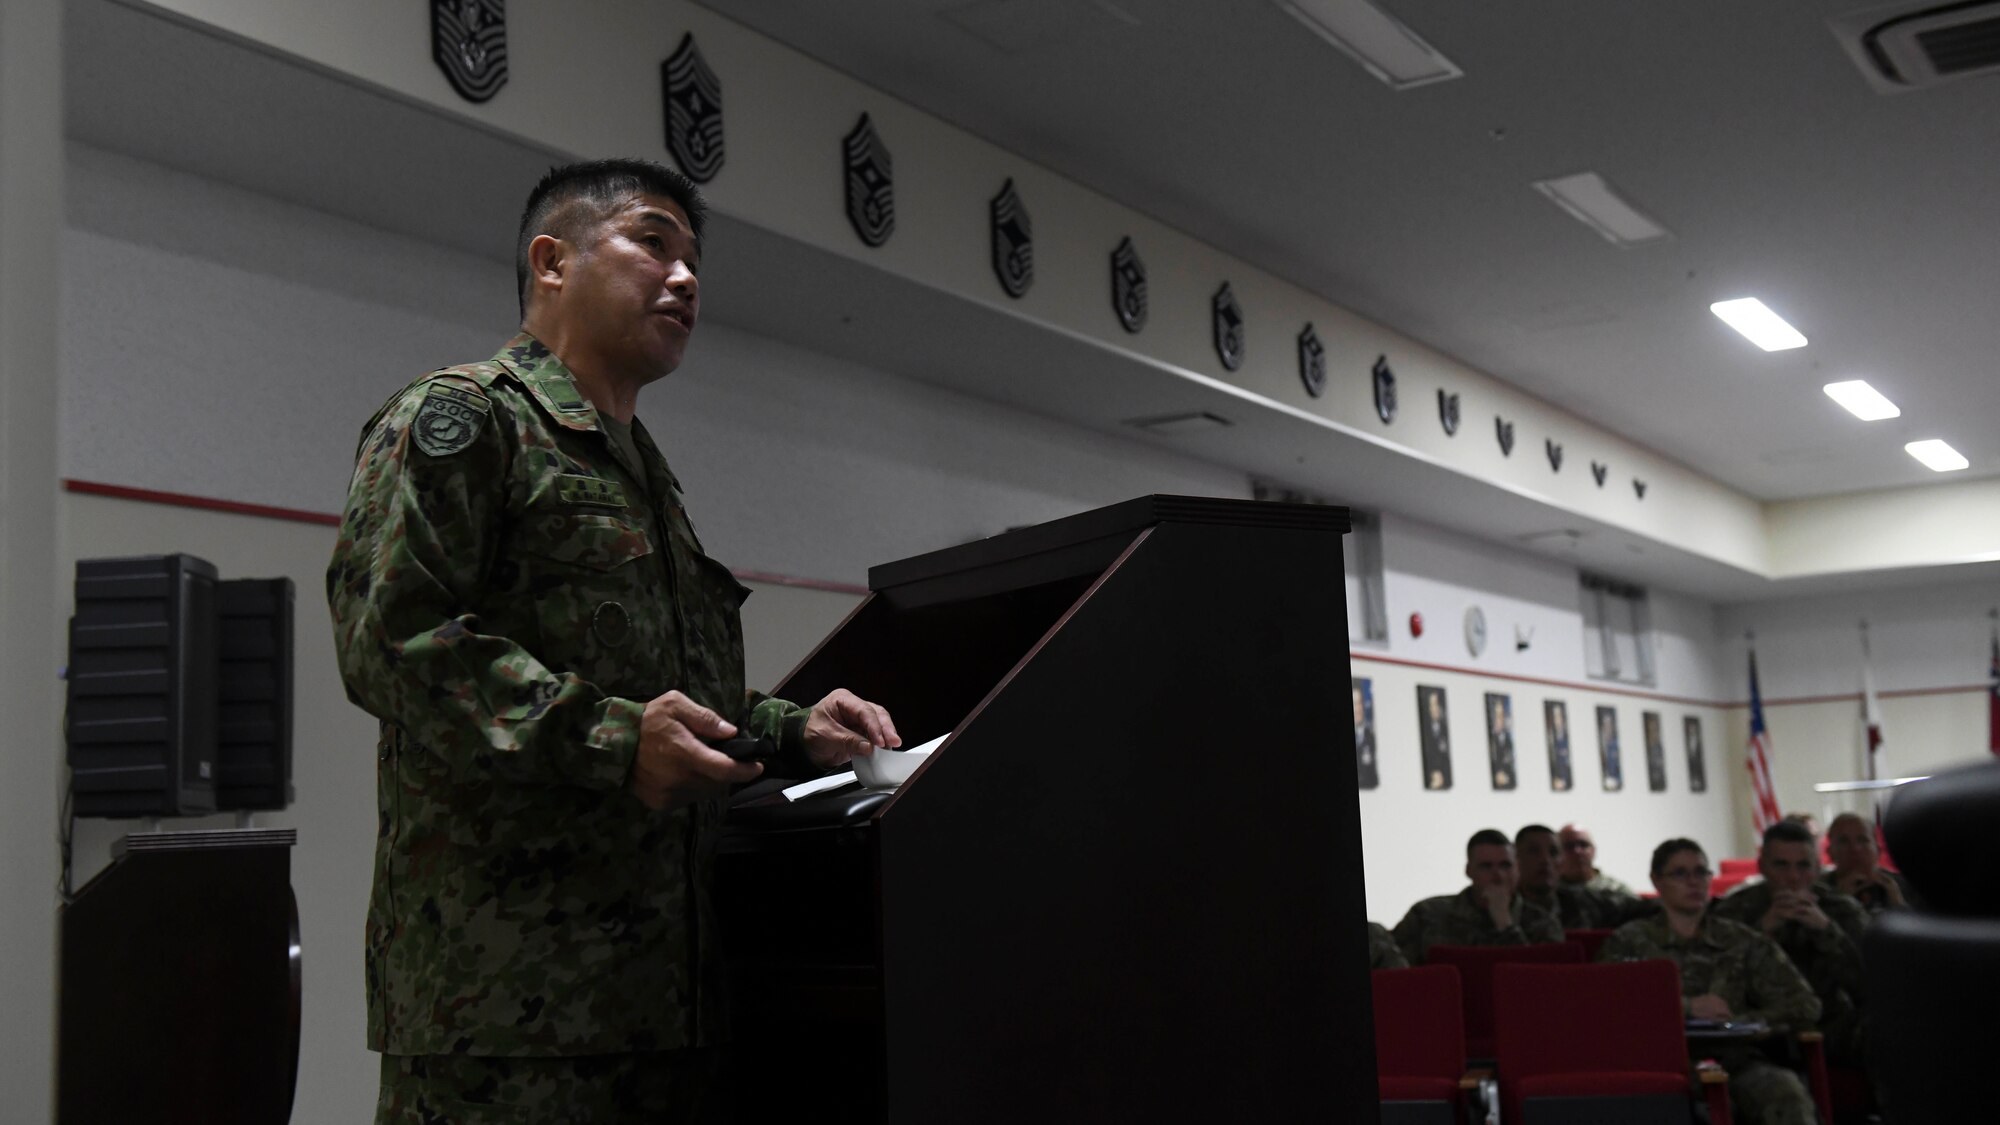 More than 50 members gathered for a two-day discussion forum on the growing adversarial influences throughout the Pacific Theater and how to improve bilateral operating concepts for great power competition.